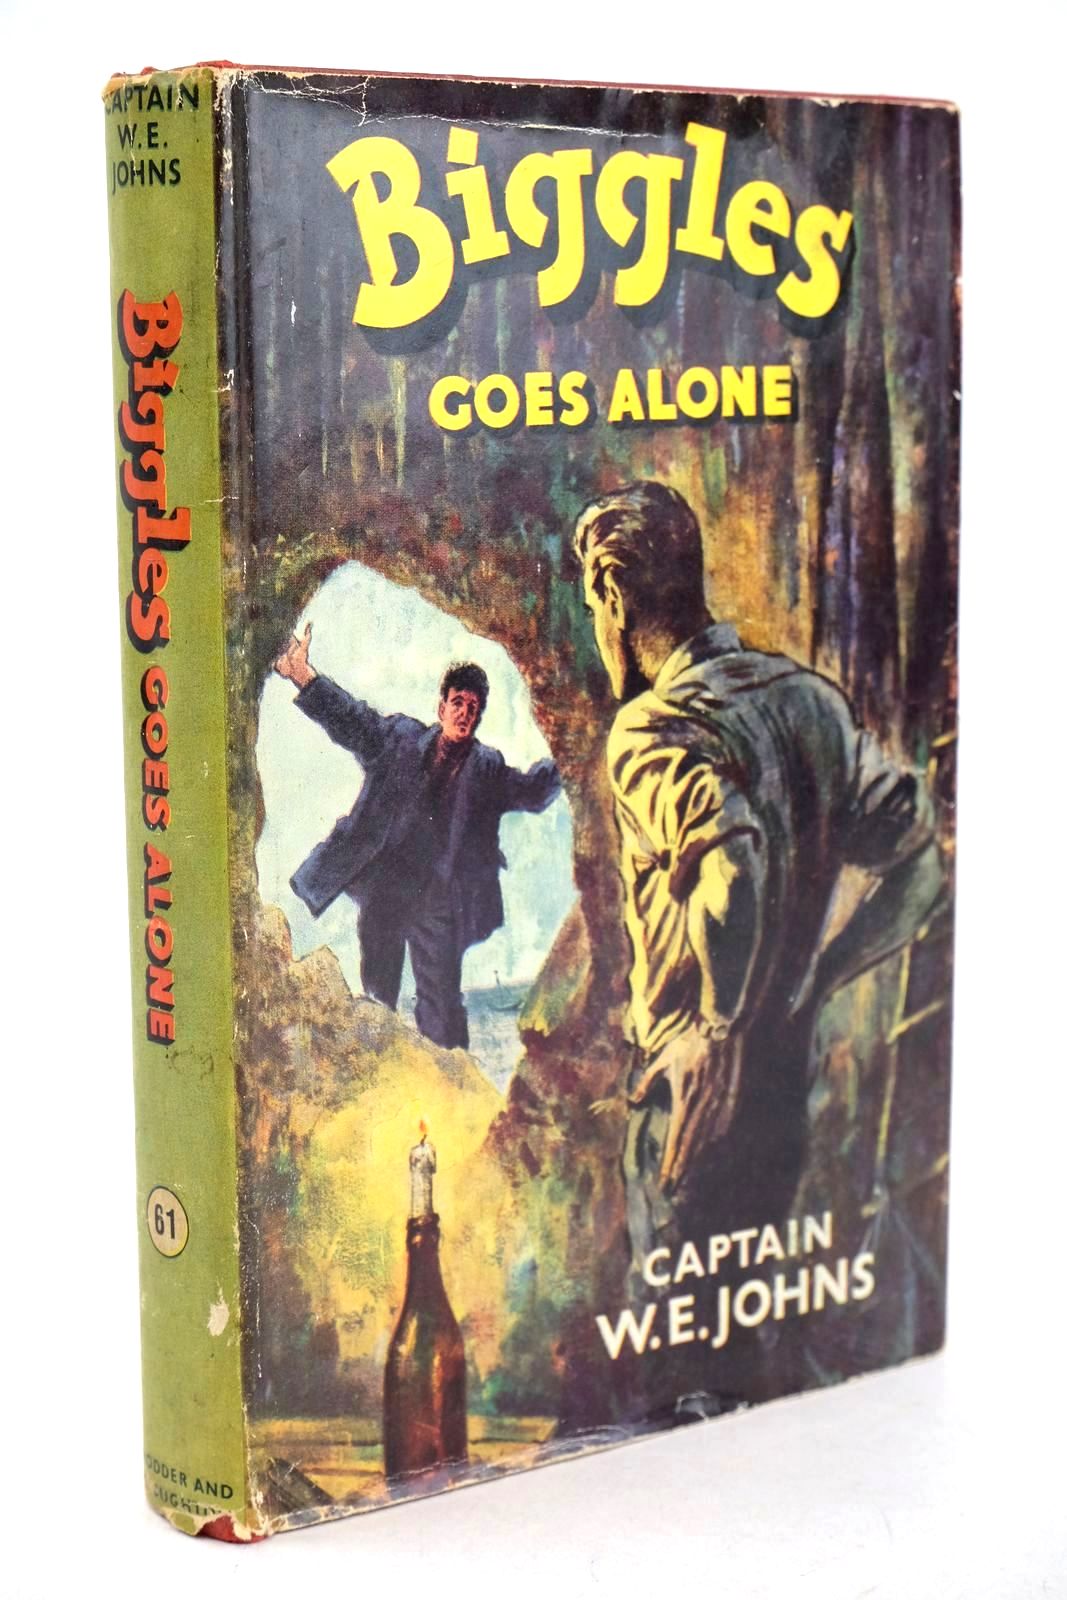 Photo of BIGGLES GOES ALONE written by Johns, W.E. illustrated by Stead,  published by Hodder & Stoughton (STOCK CODE: 1326631)  for sale by Stella & Rose's Books